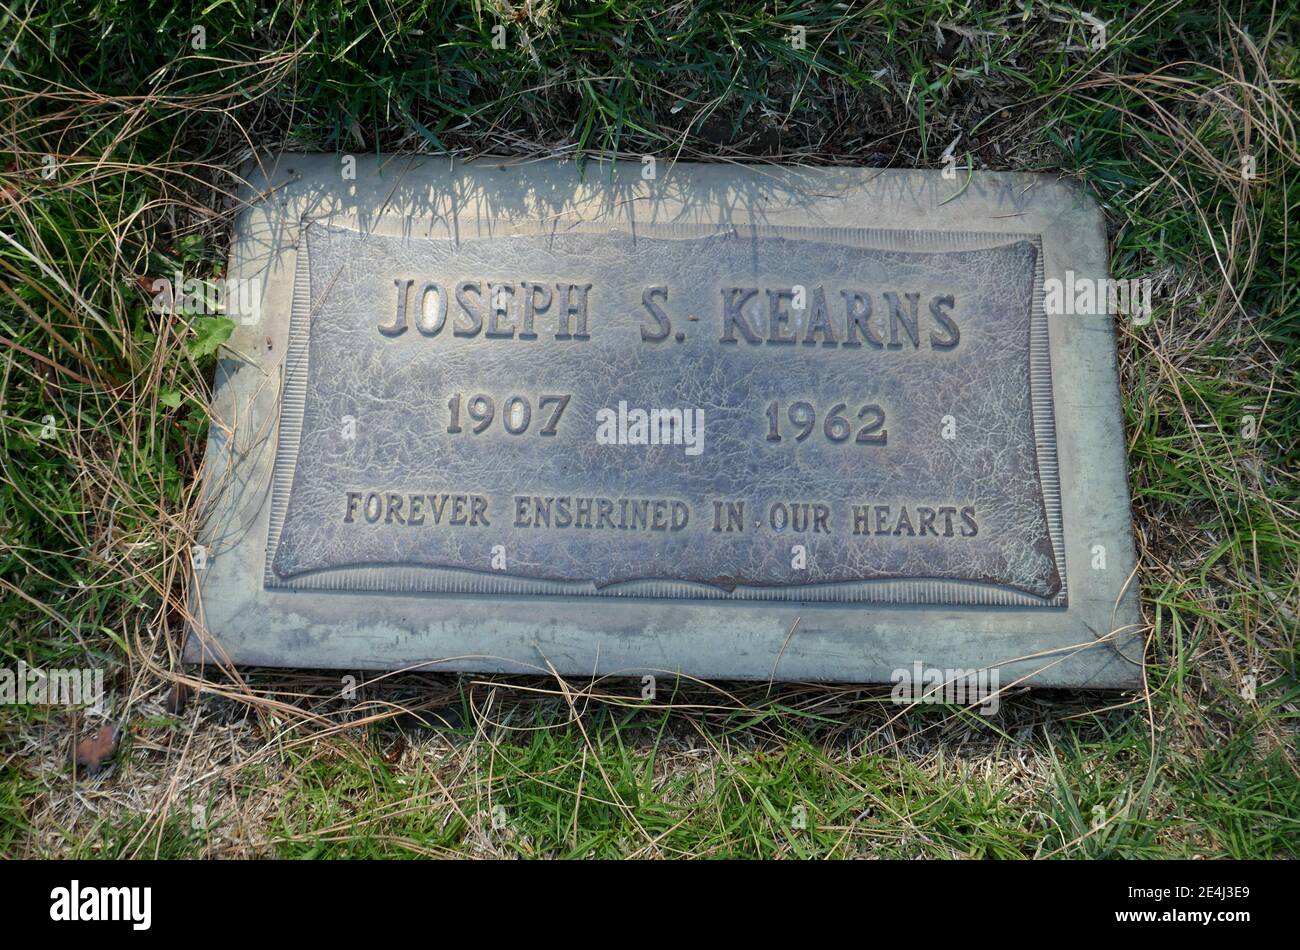 Los Angeles, California, USA 21st January 2021 A general view of atmosphere of actor Joseph Kearns Grave at Forest Lawn Memorial Park Hollywood Hills on January 21, 2021 in Los Angeles, California, USA. He was known for Dennis the Menace TV series and voice of the Doorknob in Disney 'Alice in Wonderland' film. Photo by Barry King/Alamy Stock Photo Stock Photo